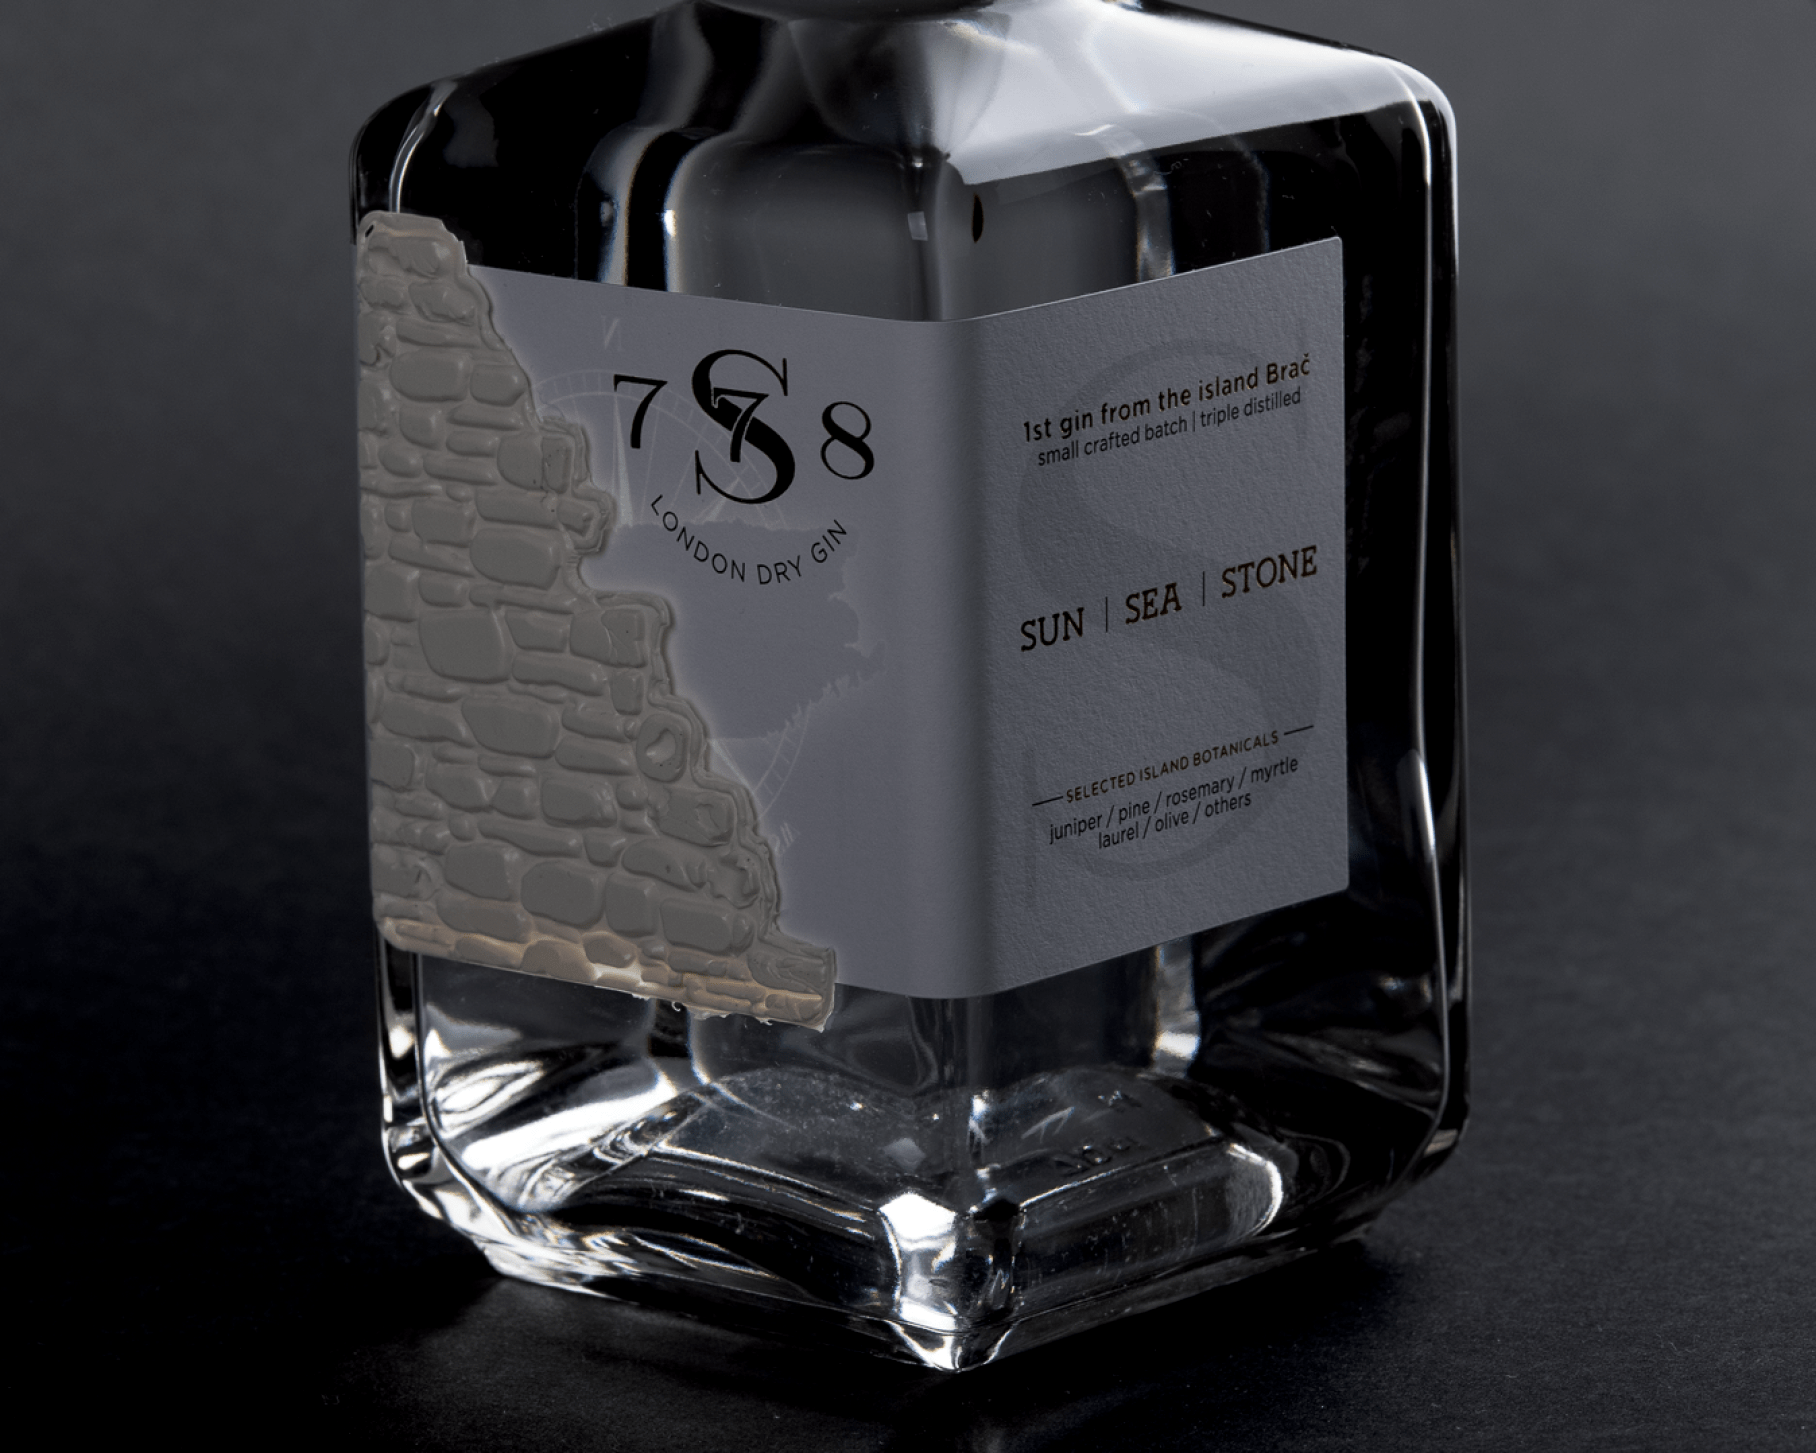 Introducing s778 Heritage Gin: A Tribute to Brač Island's Heritage and Culture through Design